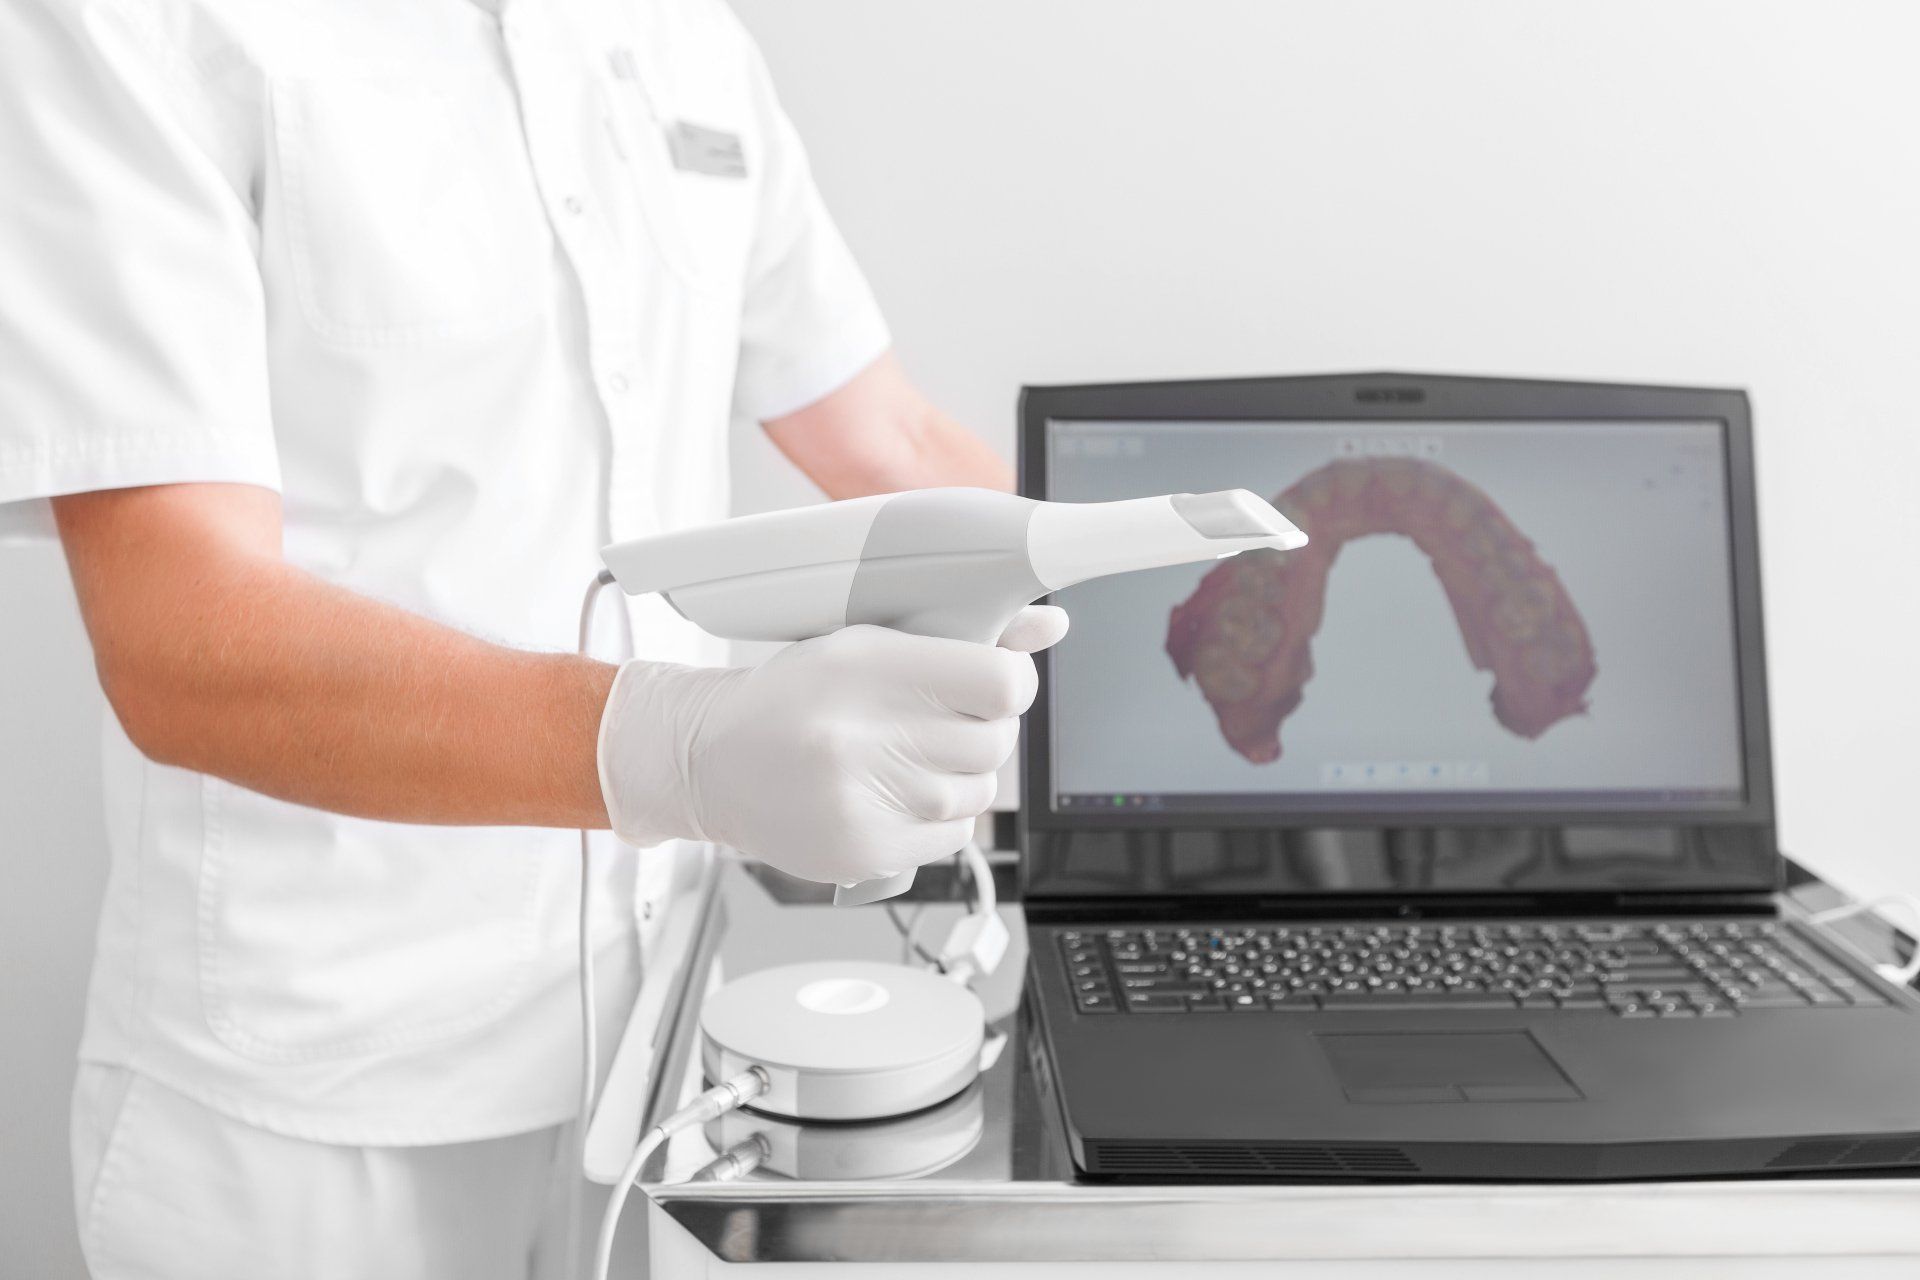 Orthodontic technology | Dental 3D scanner | Orthodontist near you | man holding scanner in front of a computer